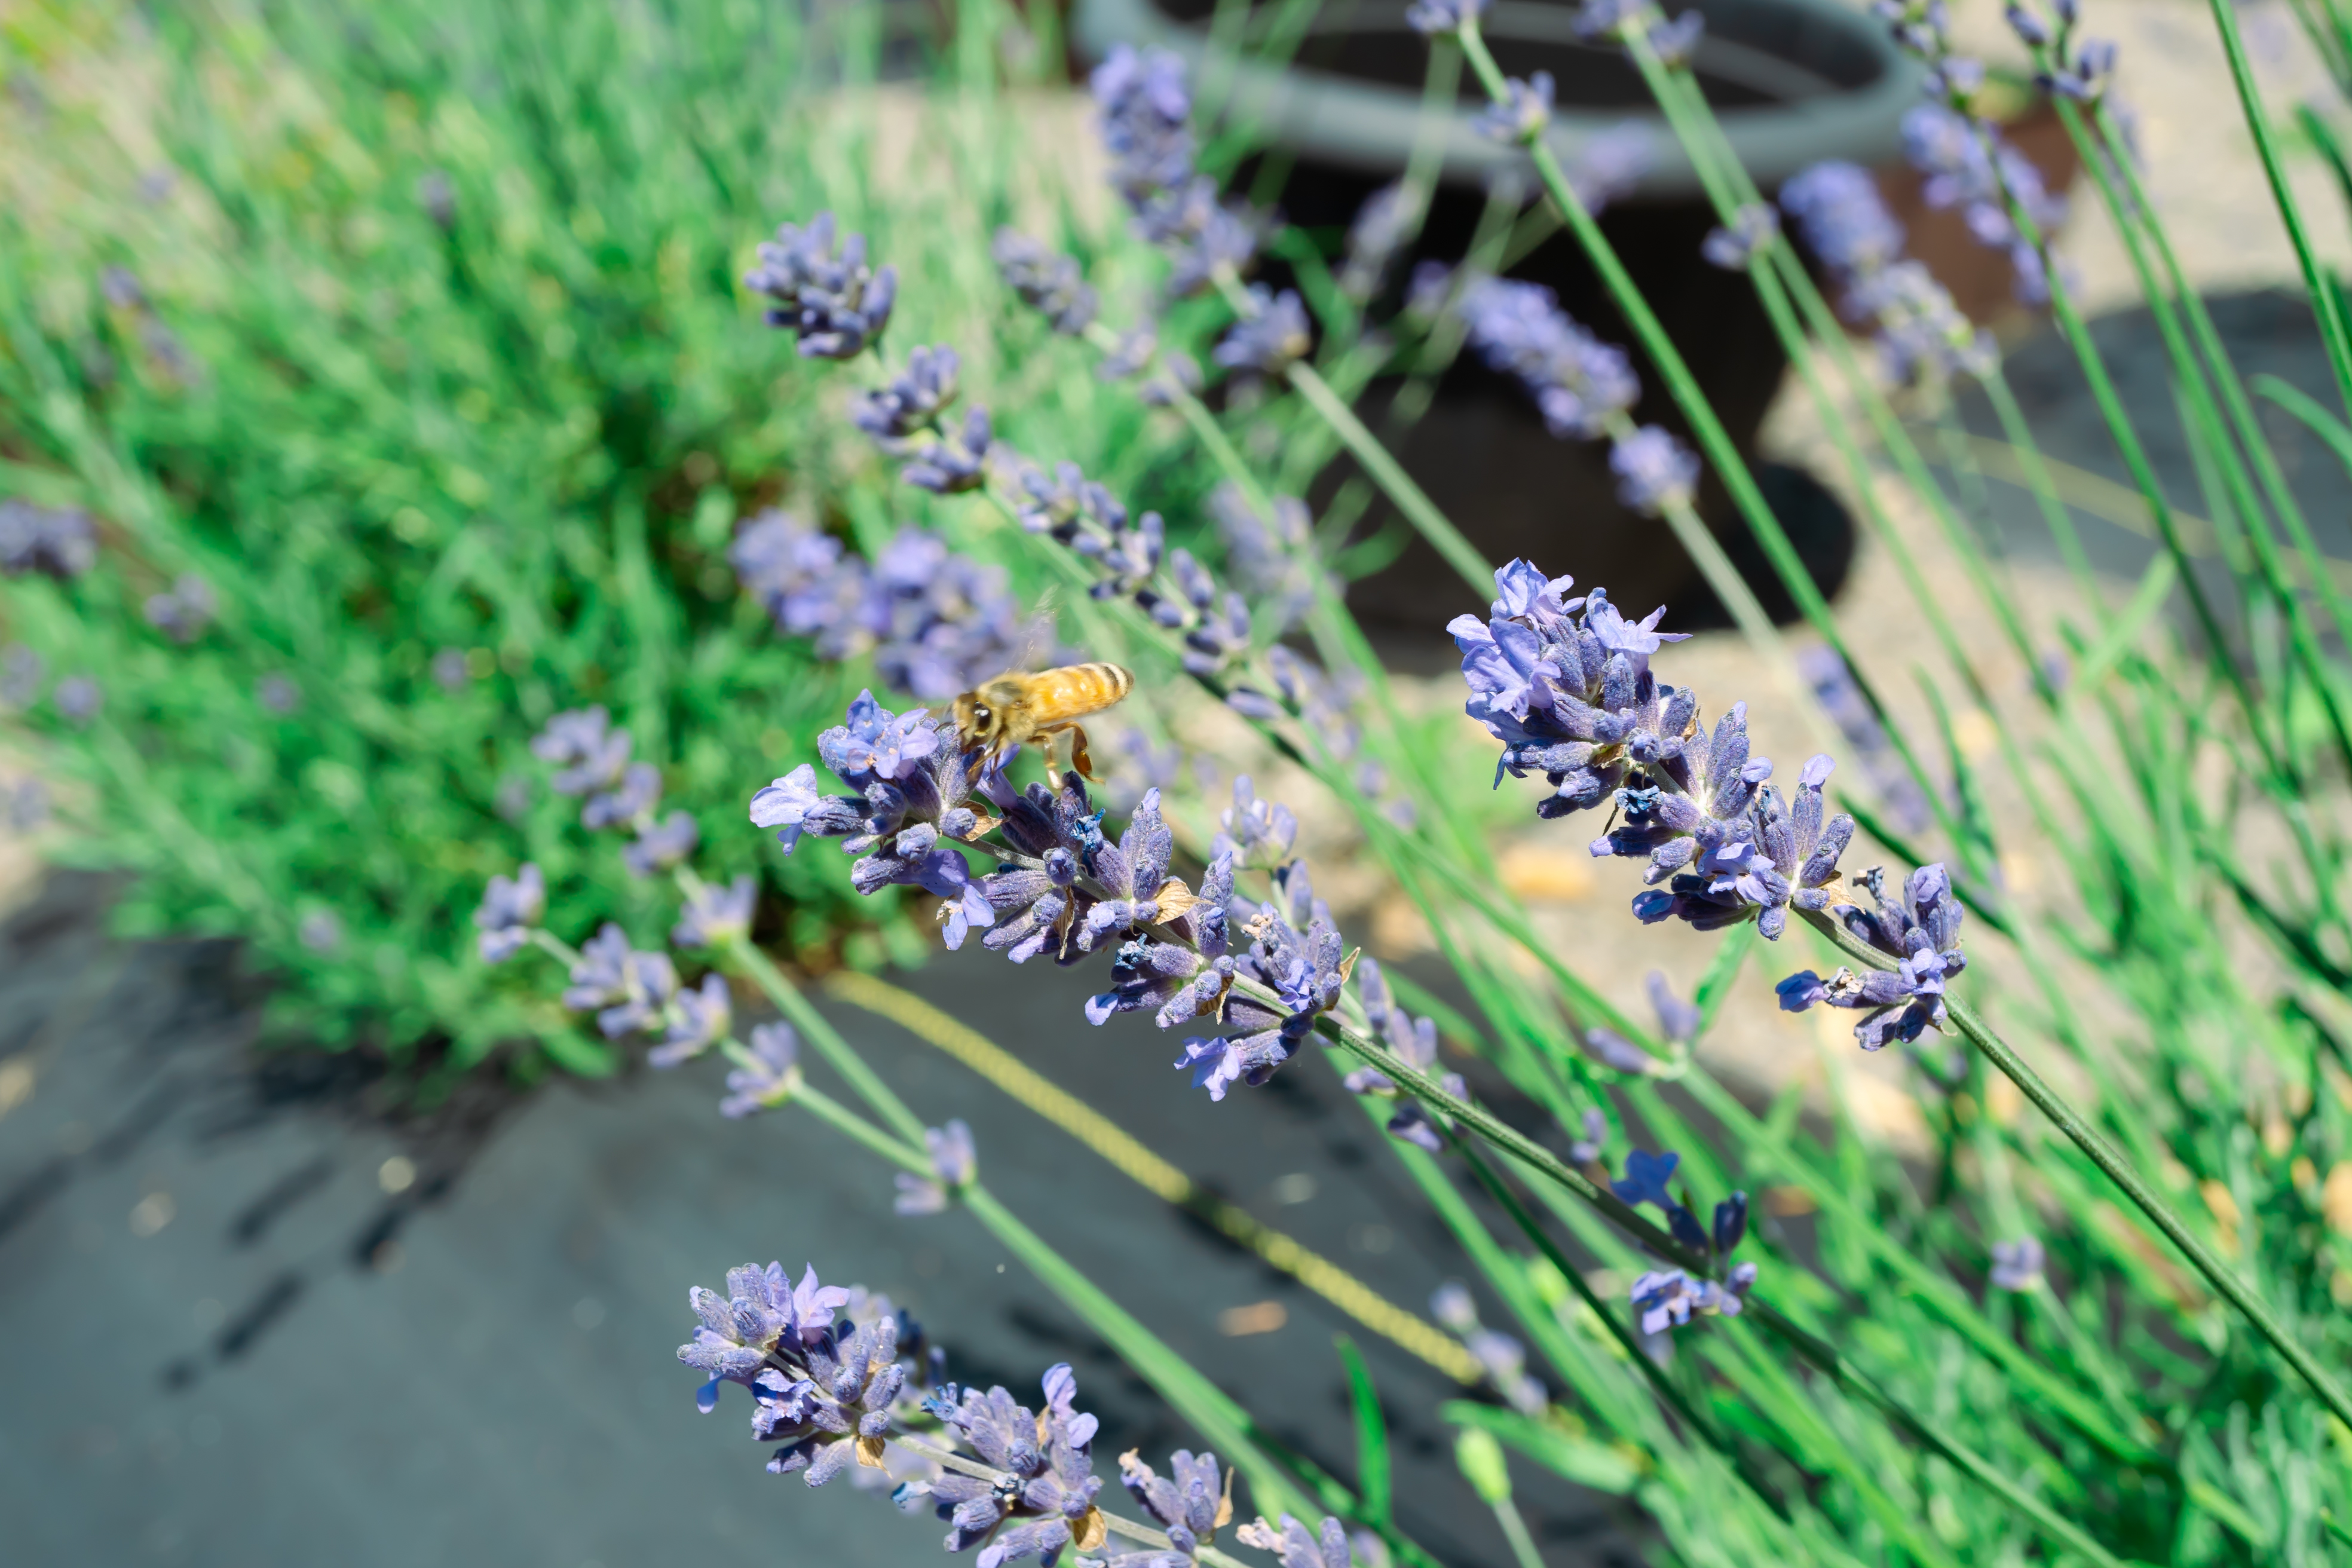 A honey bee visiting a lavender flower